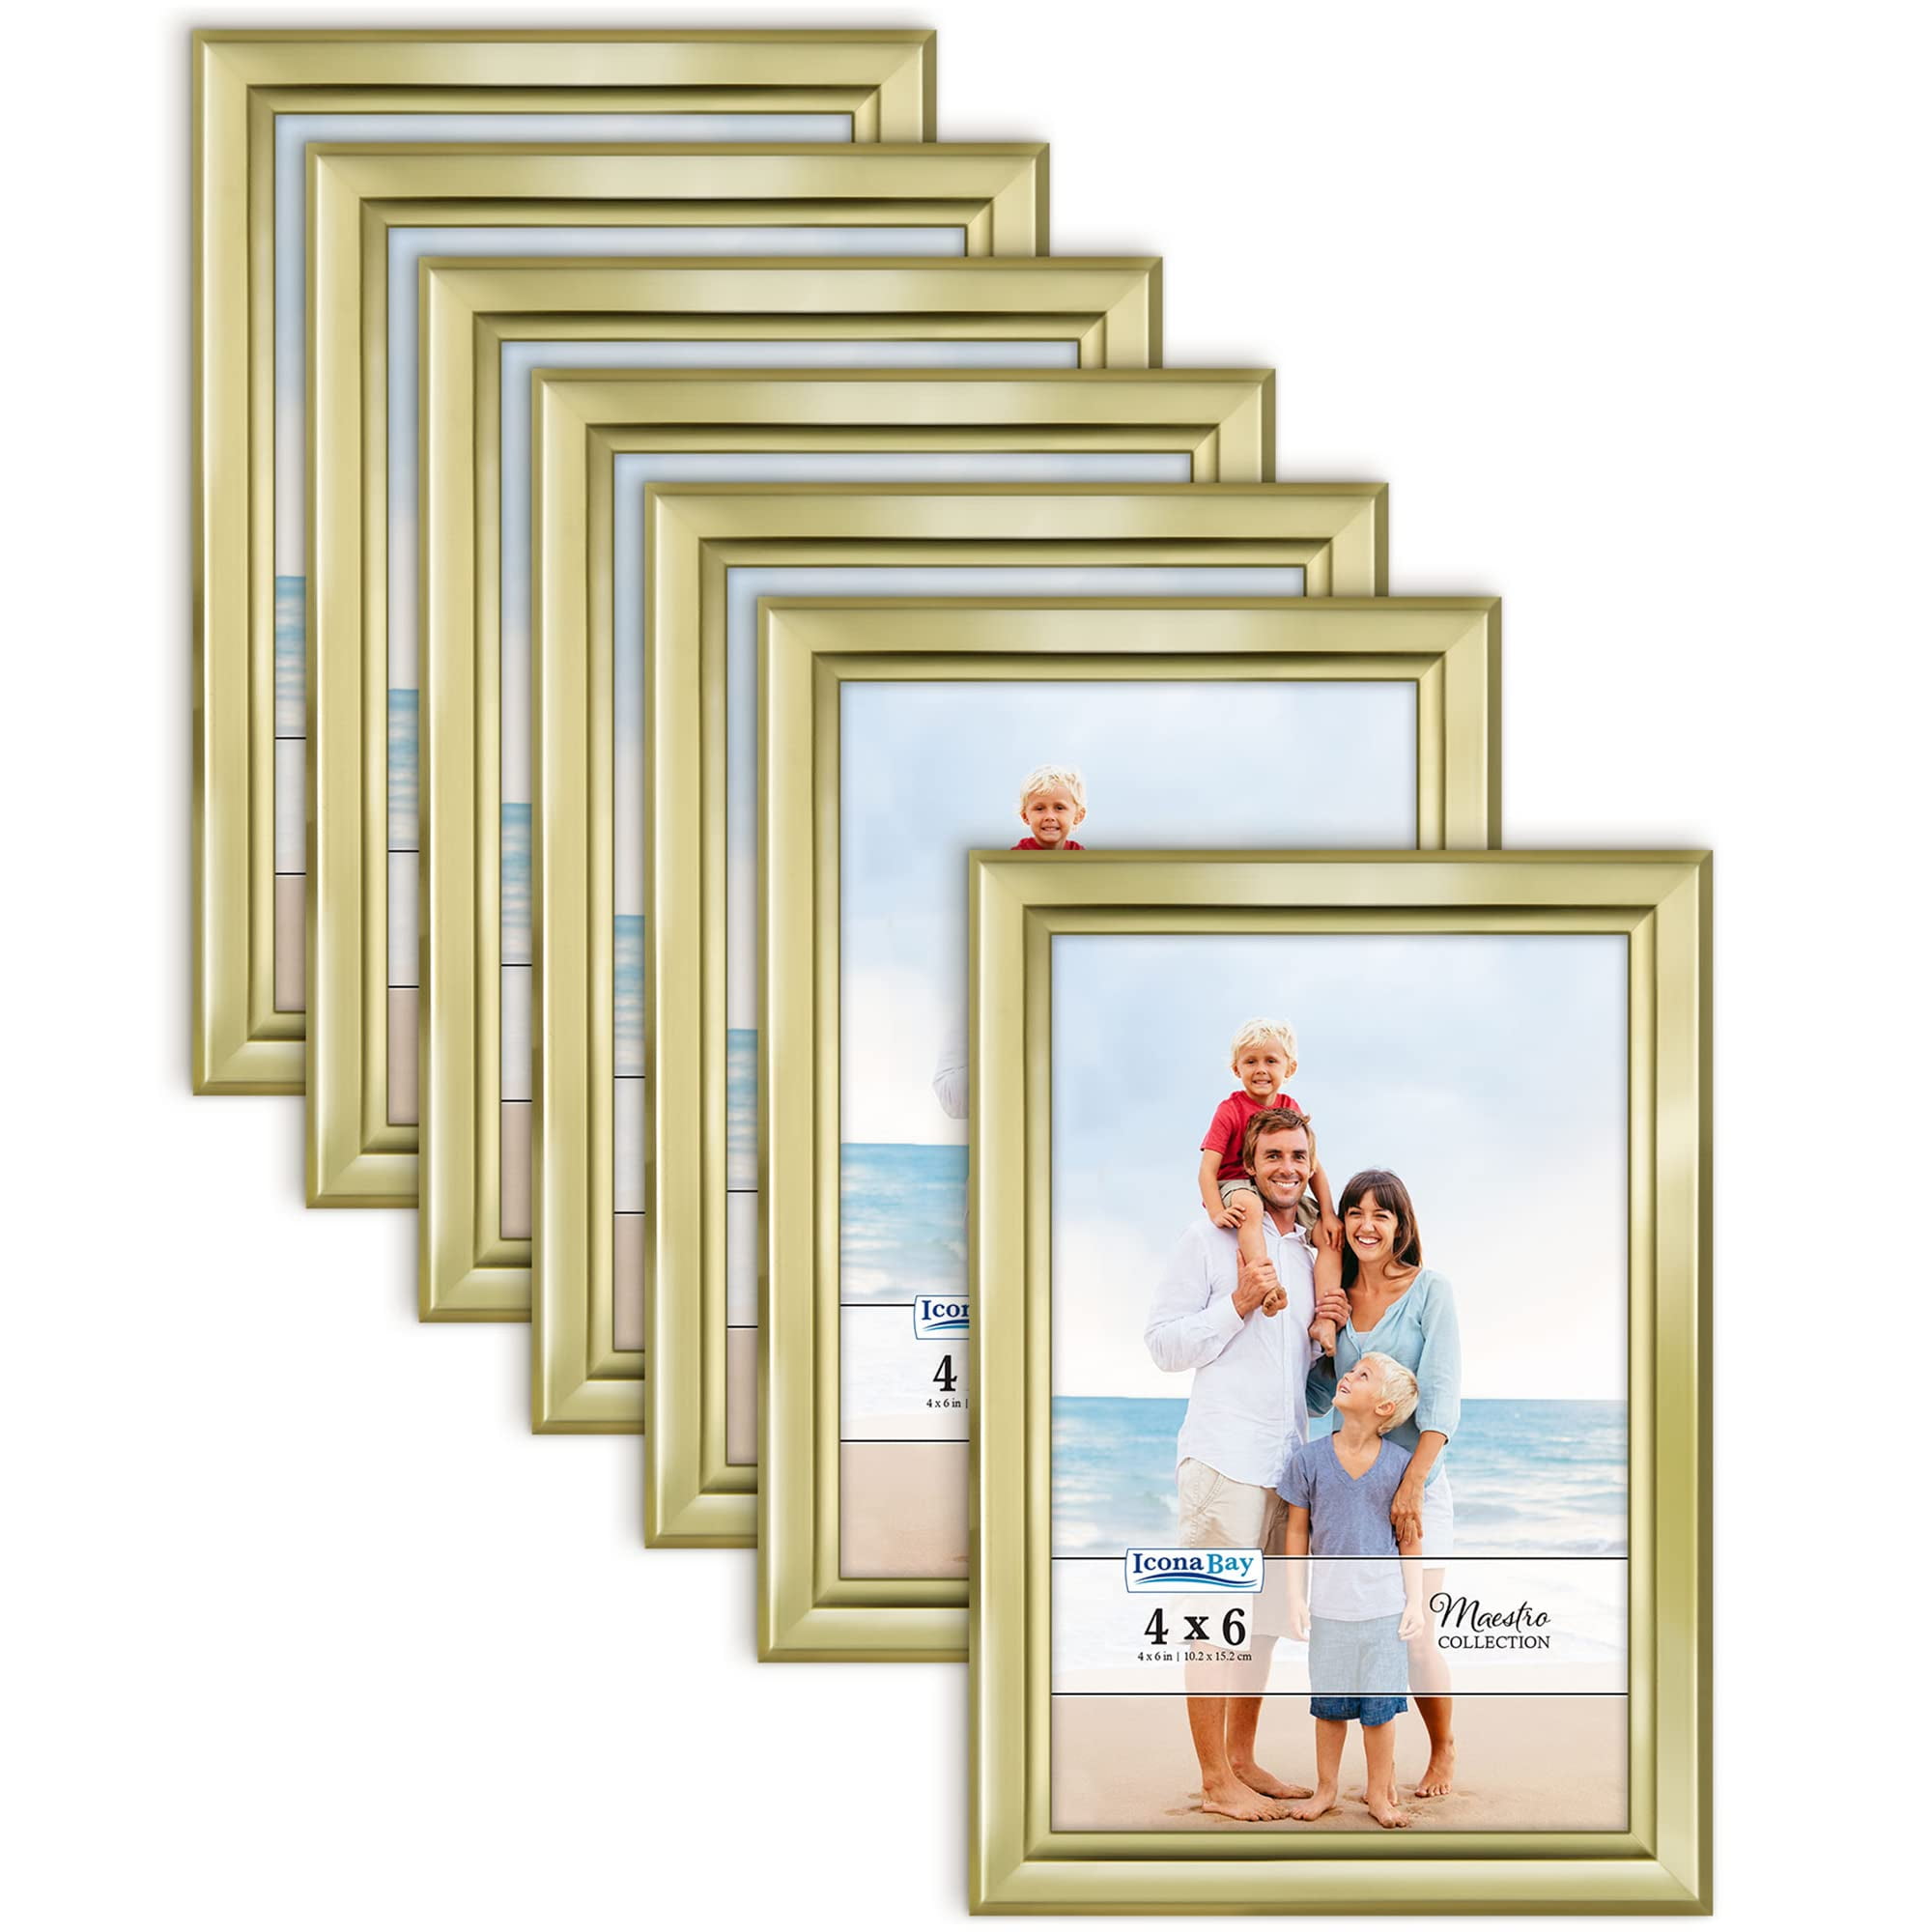 Icona Bay 4x6 Gold Picture Frames, Modern Contemporary Style, 12 Pack, Maestro Collection (US Company), Size: 4 inch x 6 inch